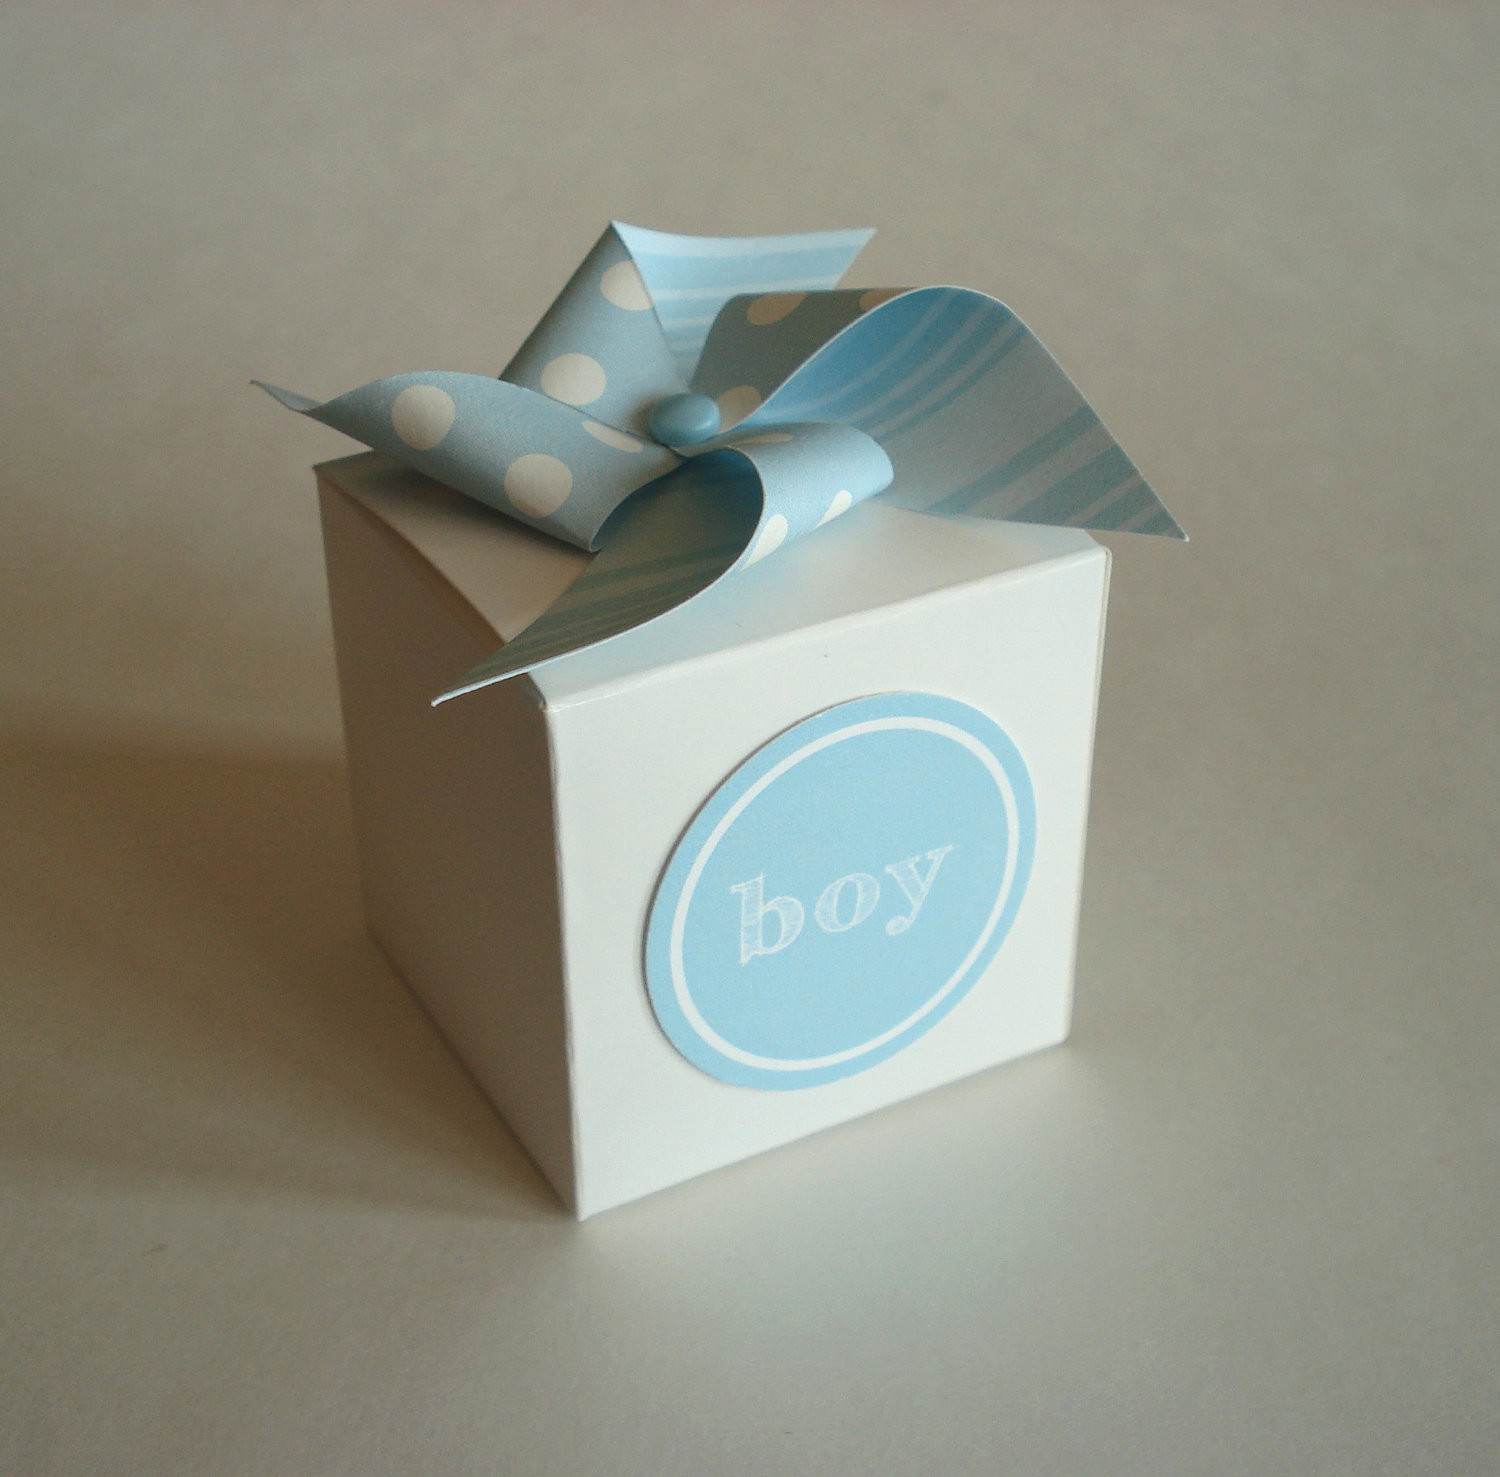 Baby Shower Gift Box Ideas
 12 Baby Shower Favor Box with Pinwheel FREE SHIPPING for